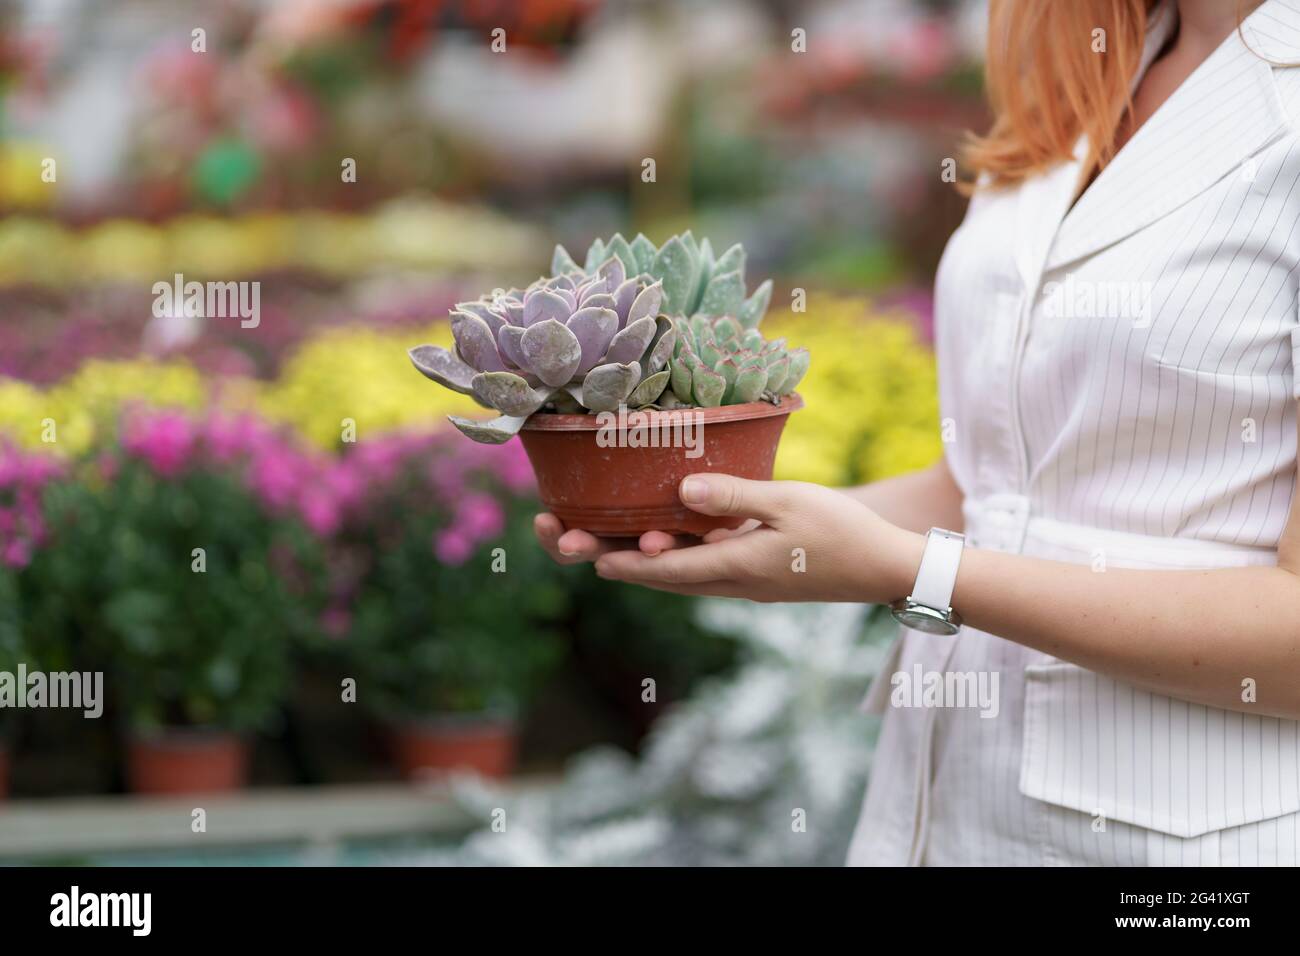 Side view at woman hands holding succulents or cactus in pots with other colorful flowers in background Stock Photo